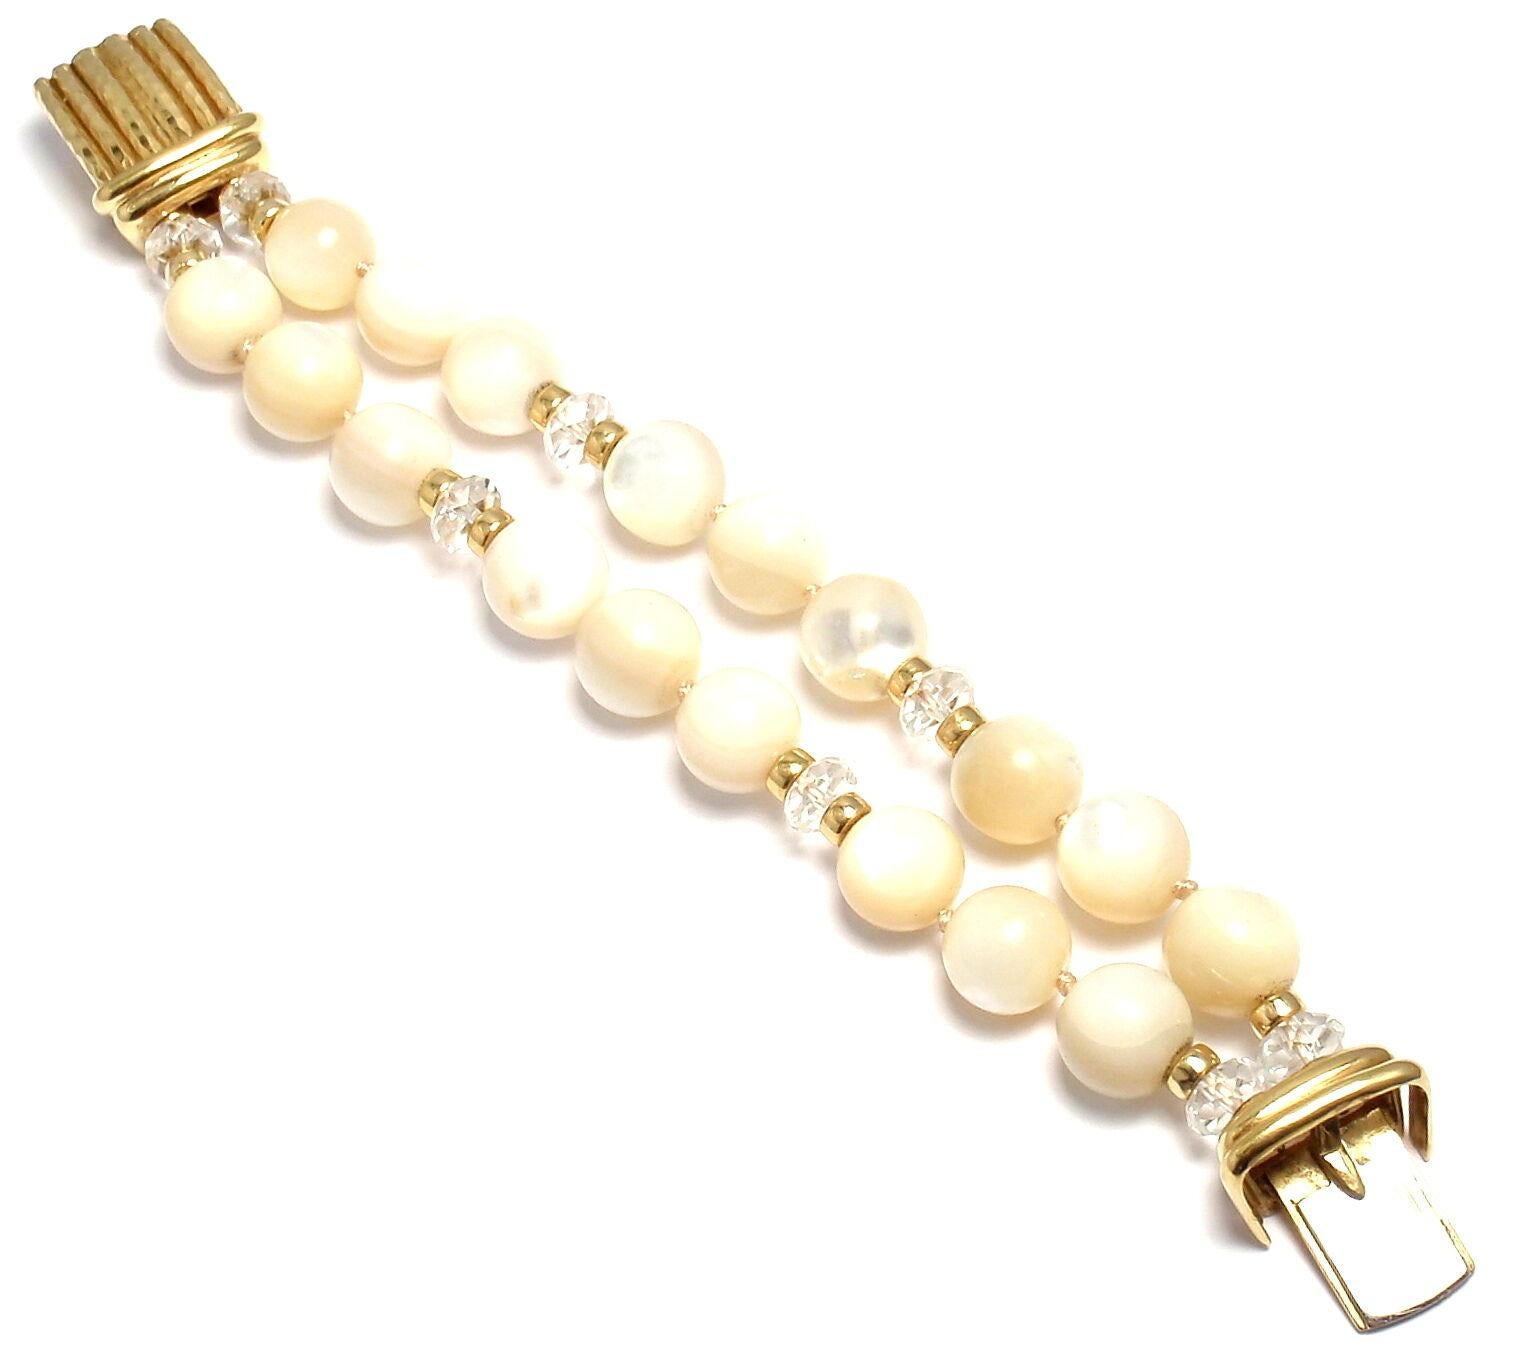 18k Yellow Gold Mother Of Pearl And Crystal Bead Bracelet by Andrew Clunn. 
With 18 total Mother of pearl beads 12mm each & 8 crystal beads 8mm each.
Details: 
Length: 7